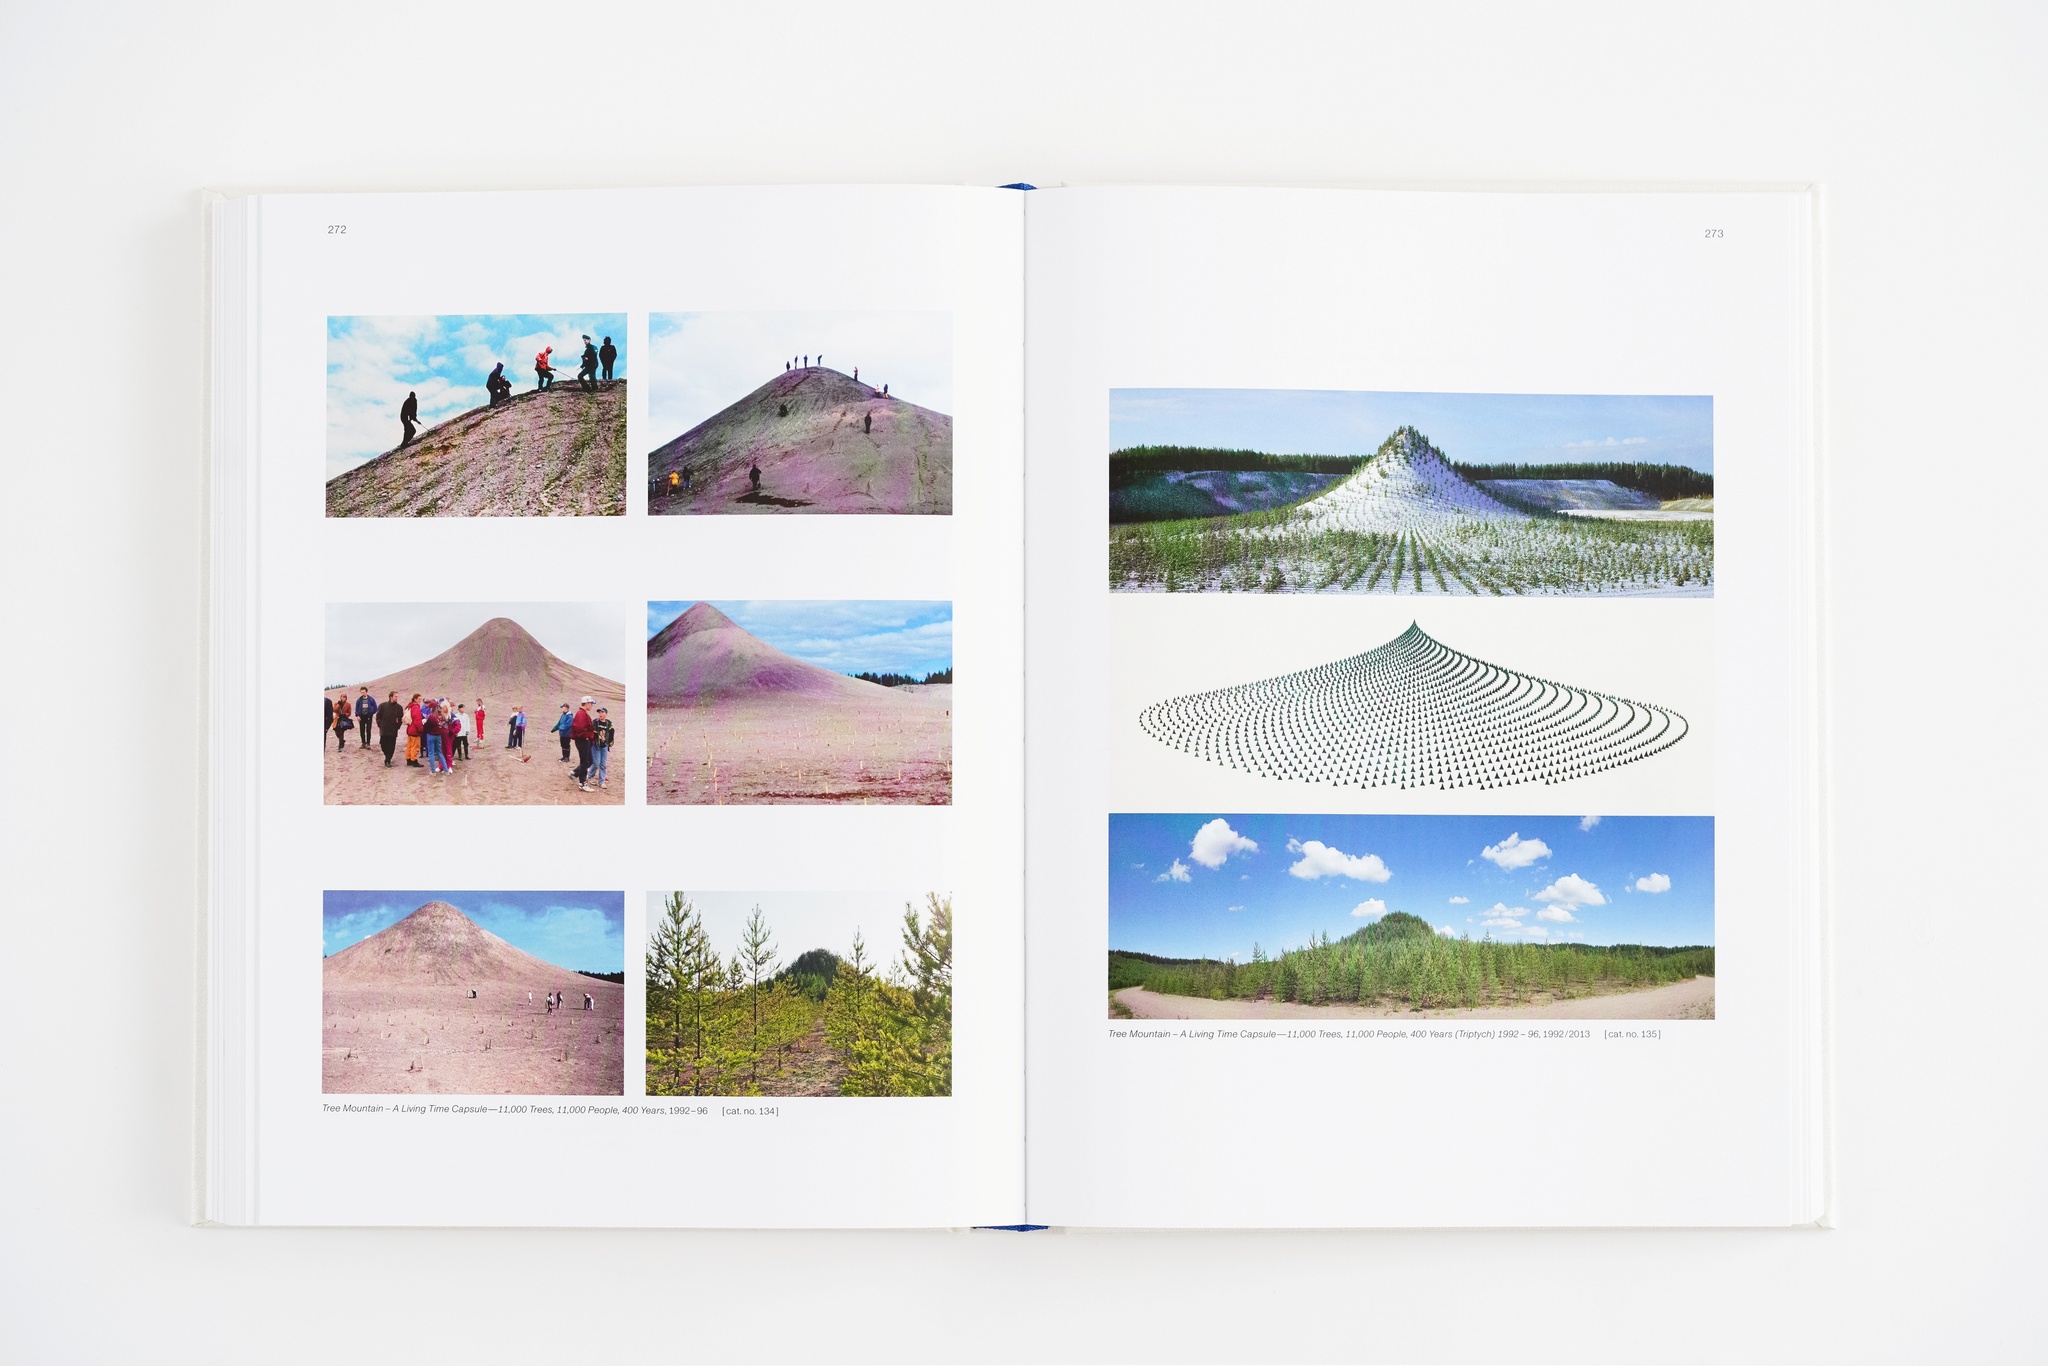 An interior spread of an exhibition catalogue displaying images of a mountain planted with trees in various stages of growth